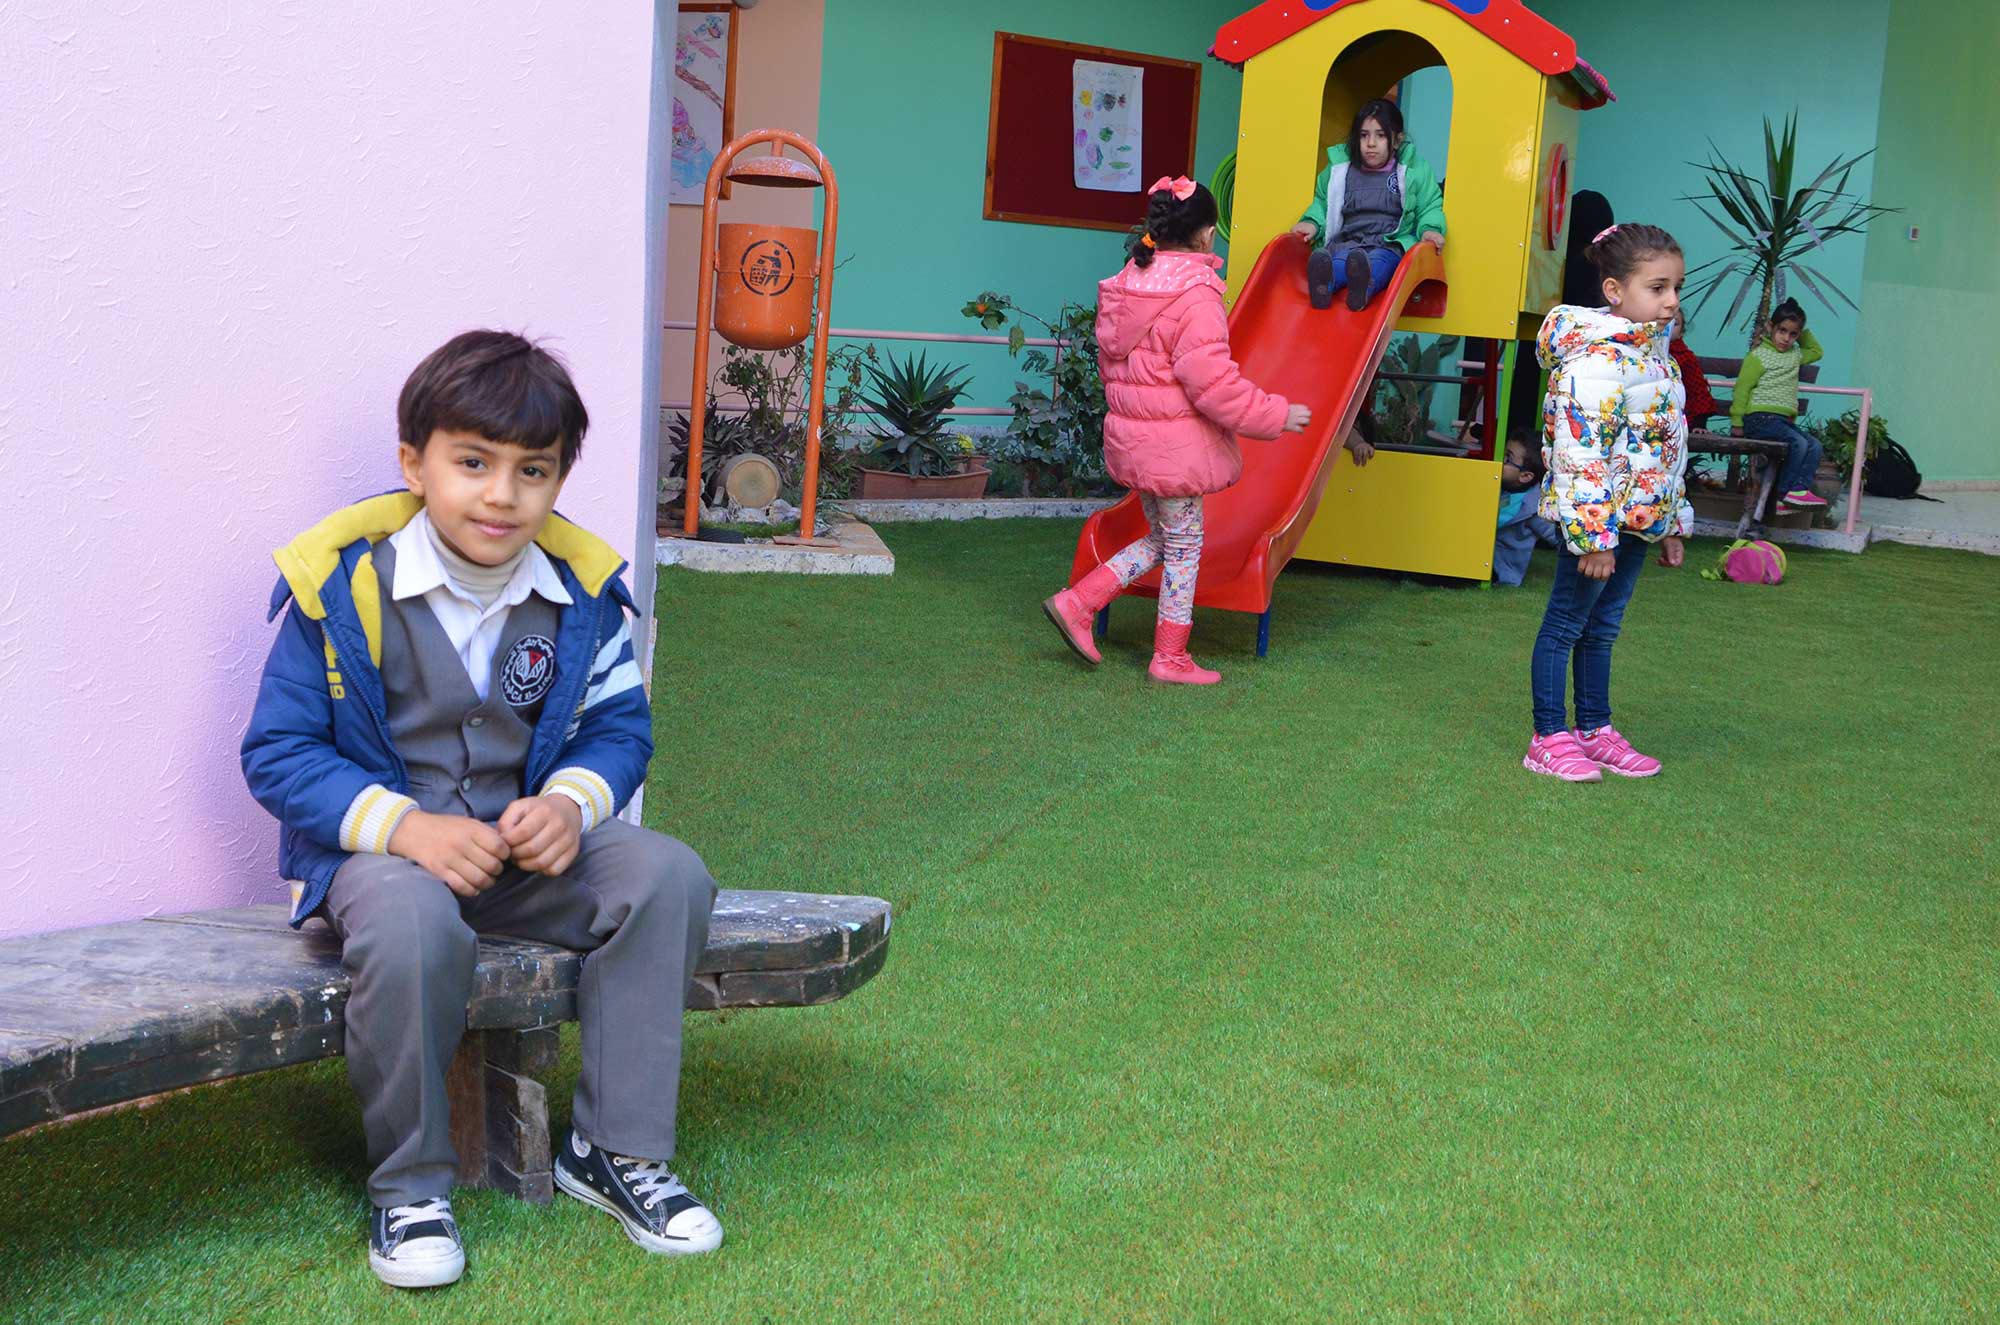 Gaza preschools received new turf and playground equipment as part of Anera's renovations.